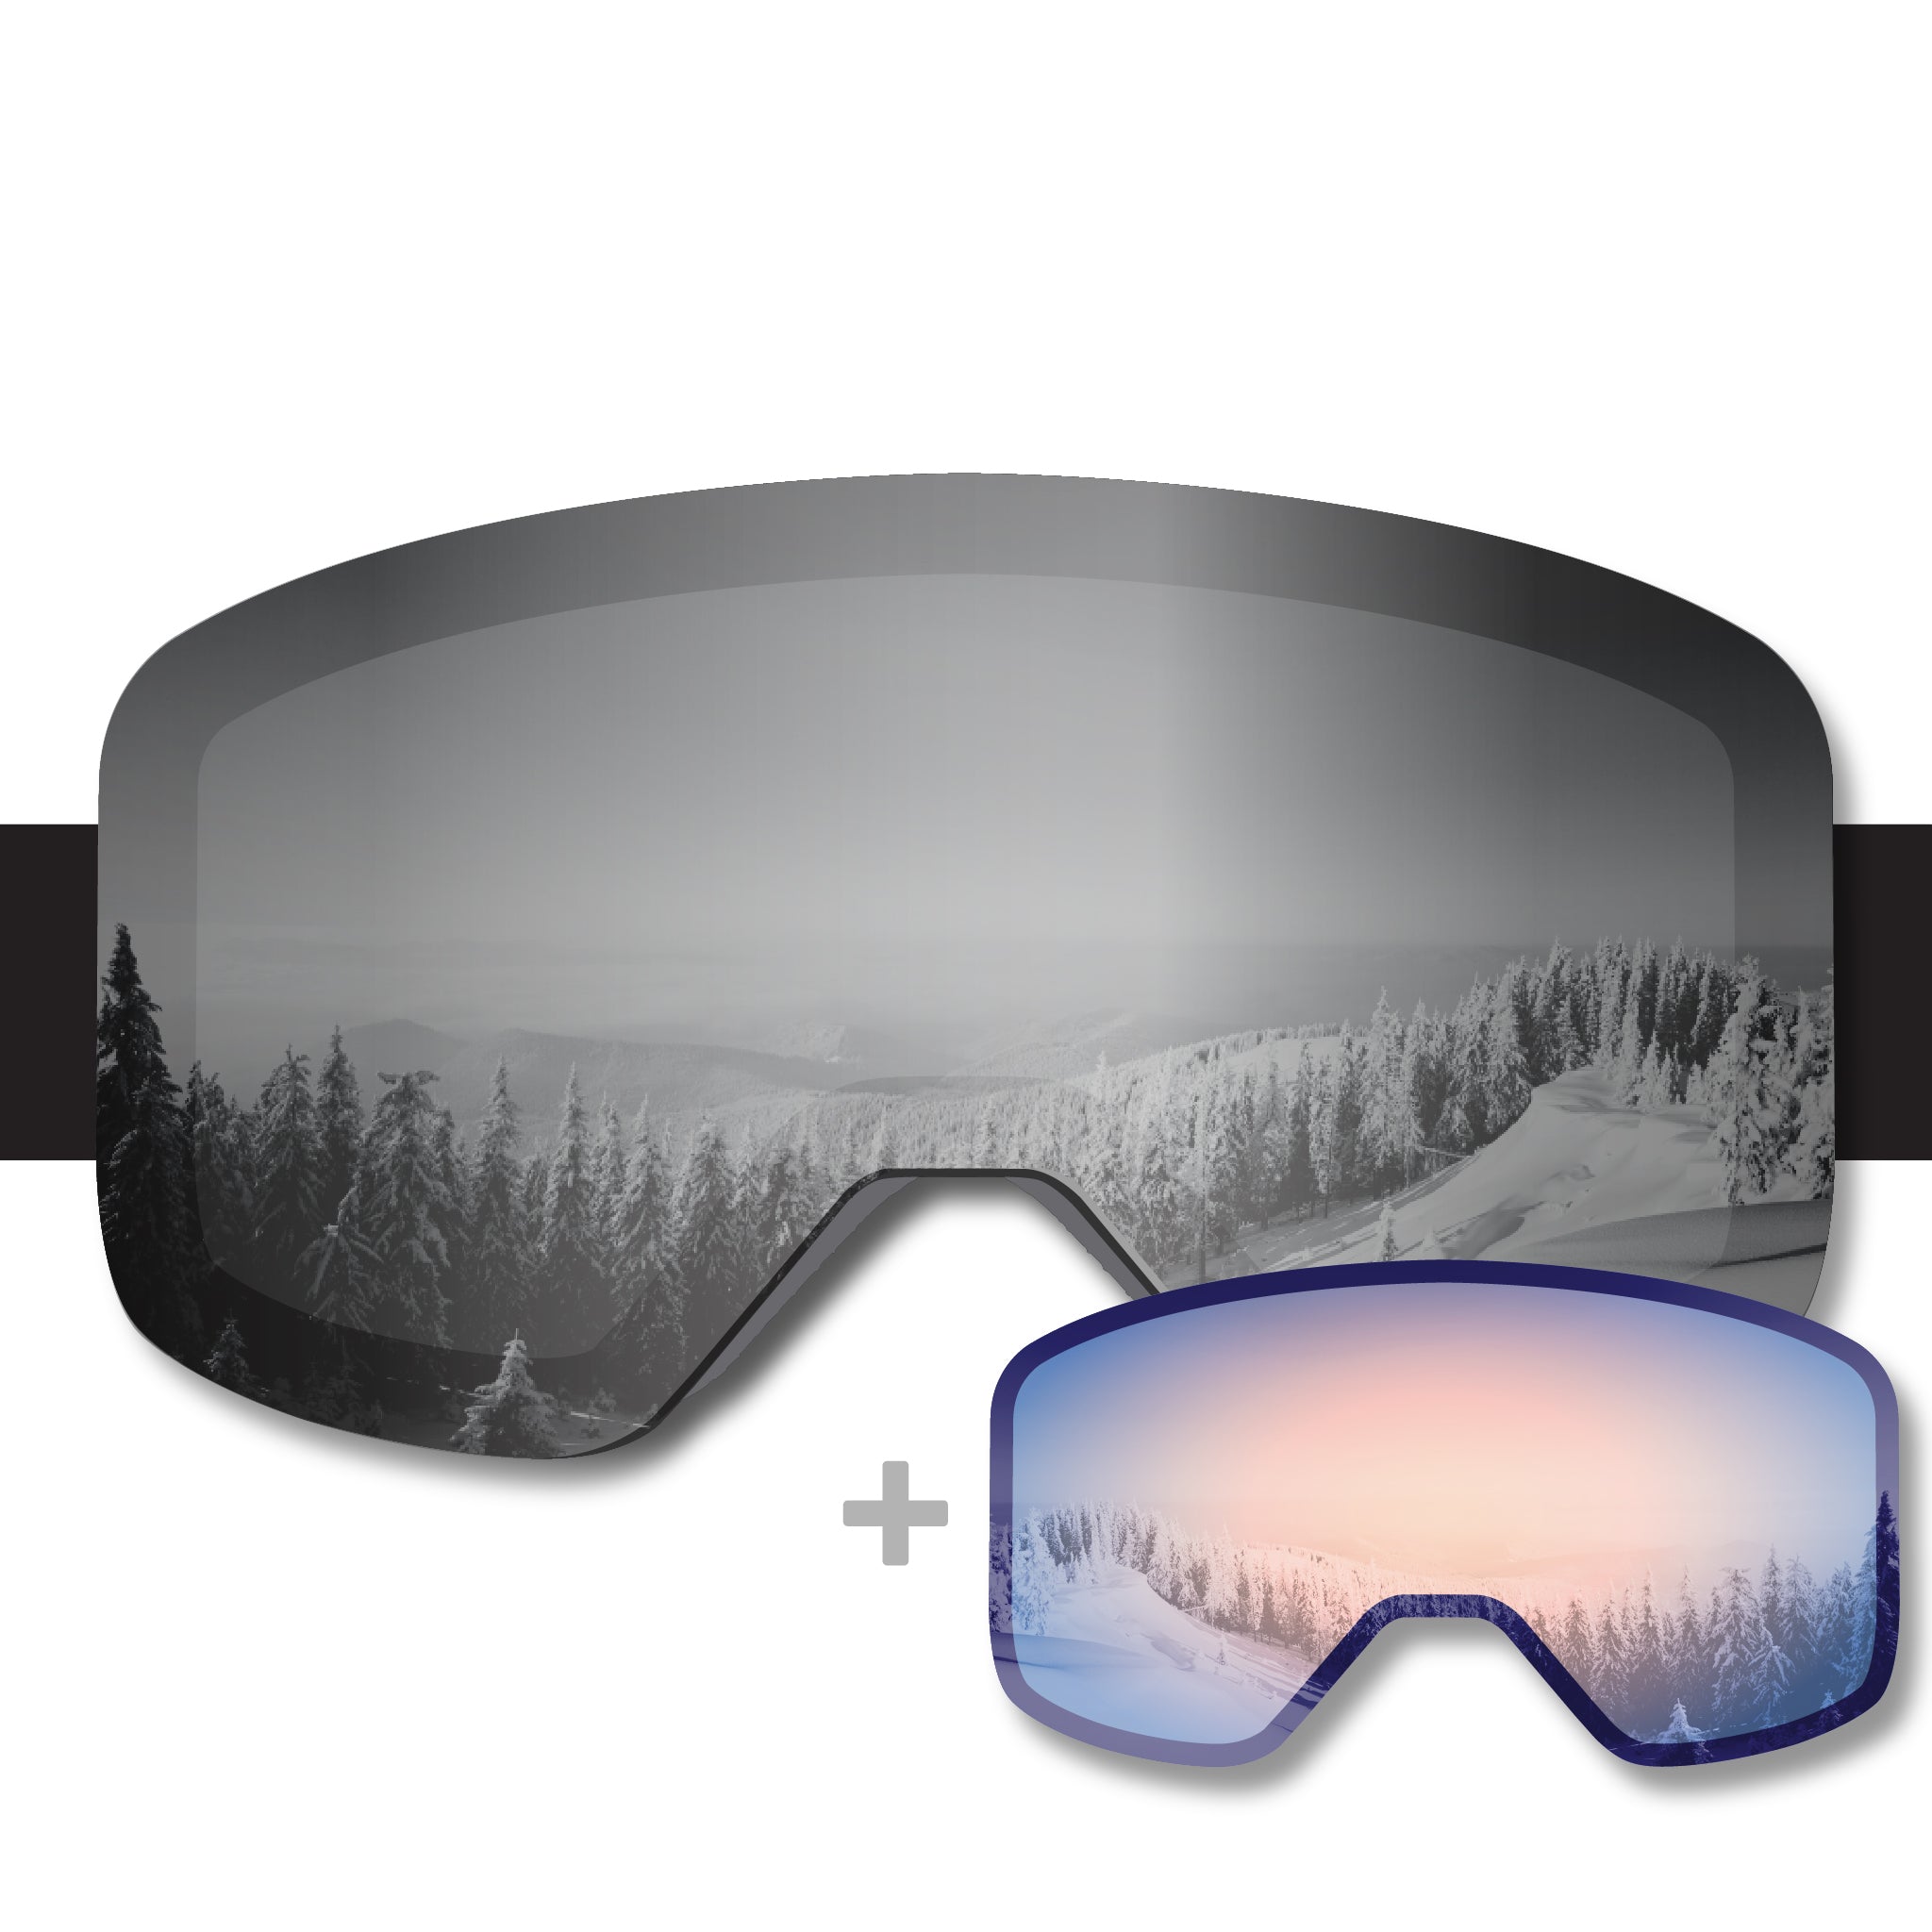 Product shot of the STAGE Propnetic Magnetic ski goggle with the Mirror Chrome Smoke Lens and Detector Revo Lens.